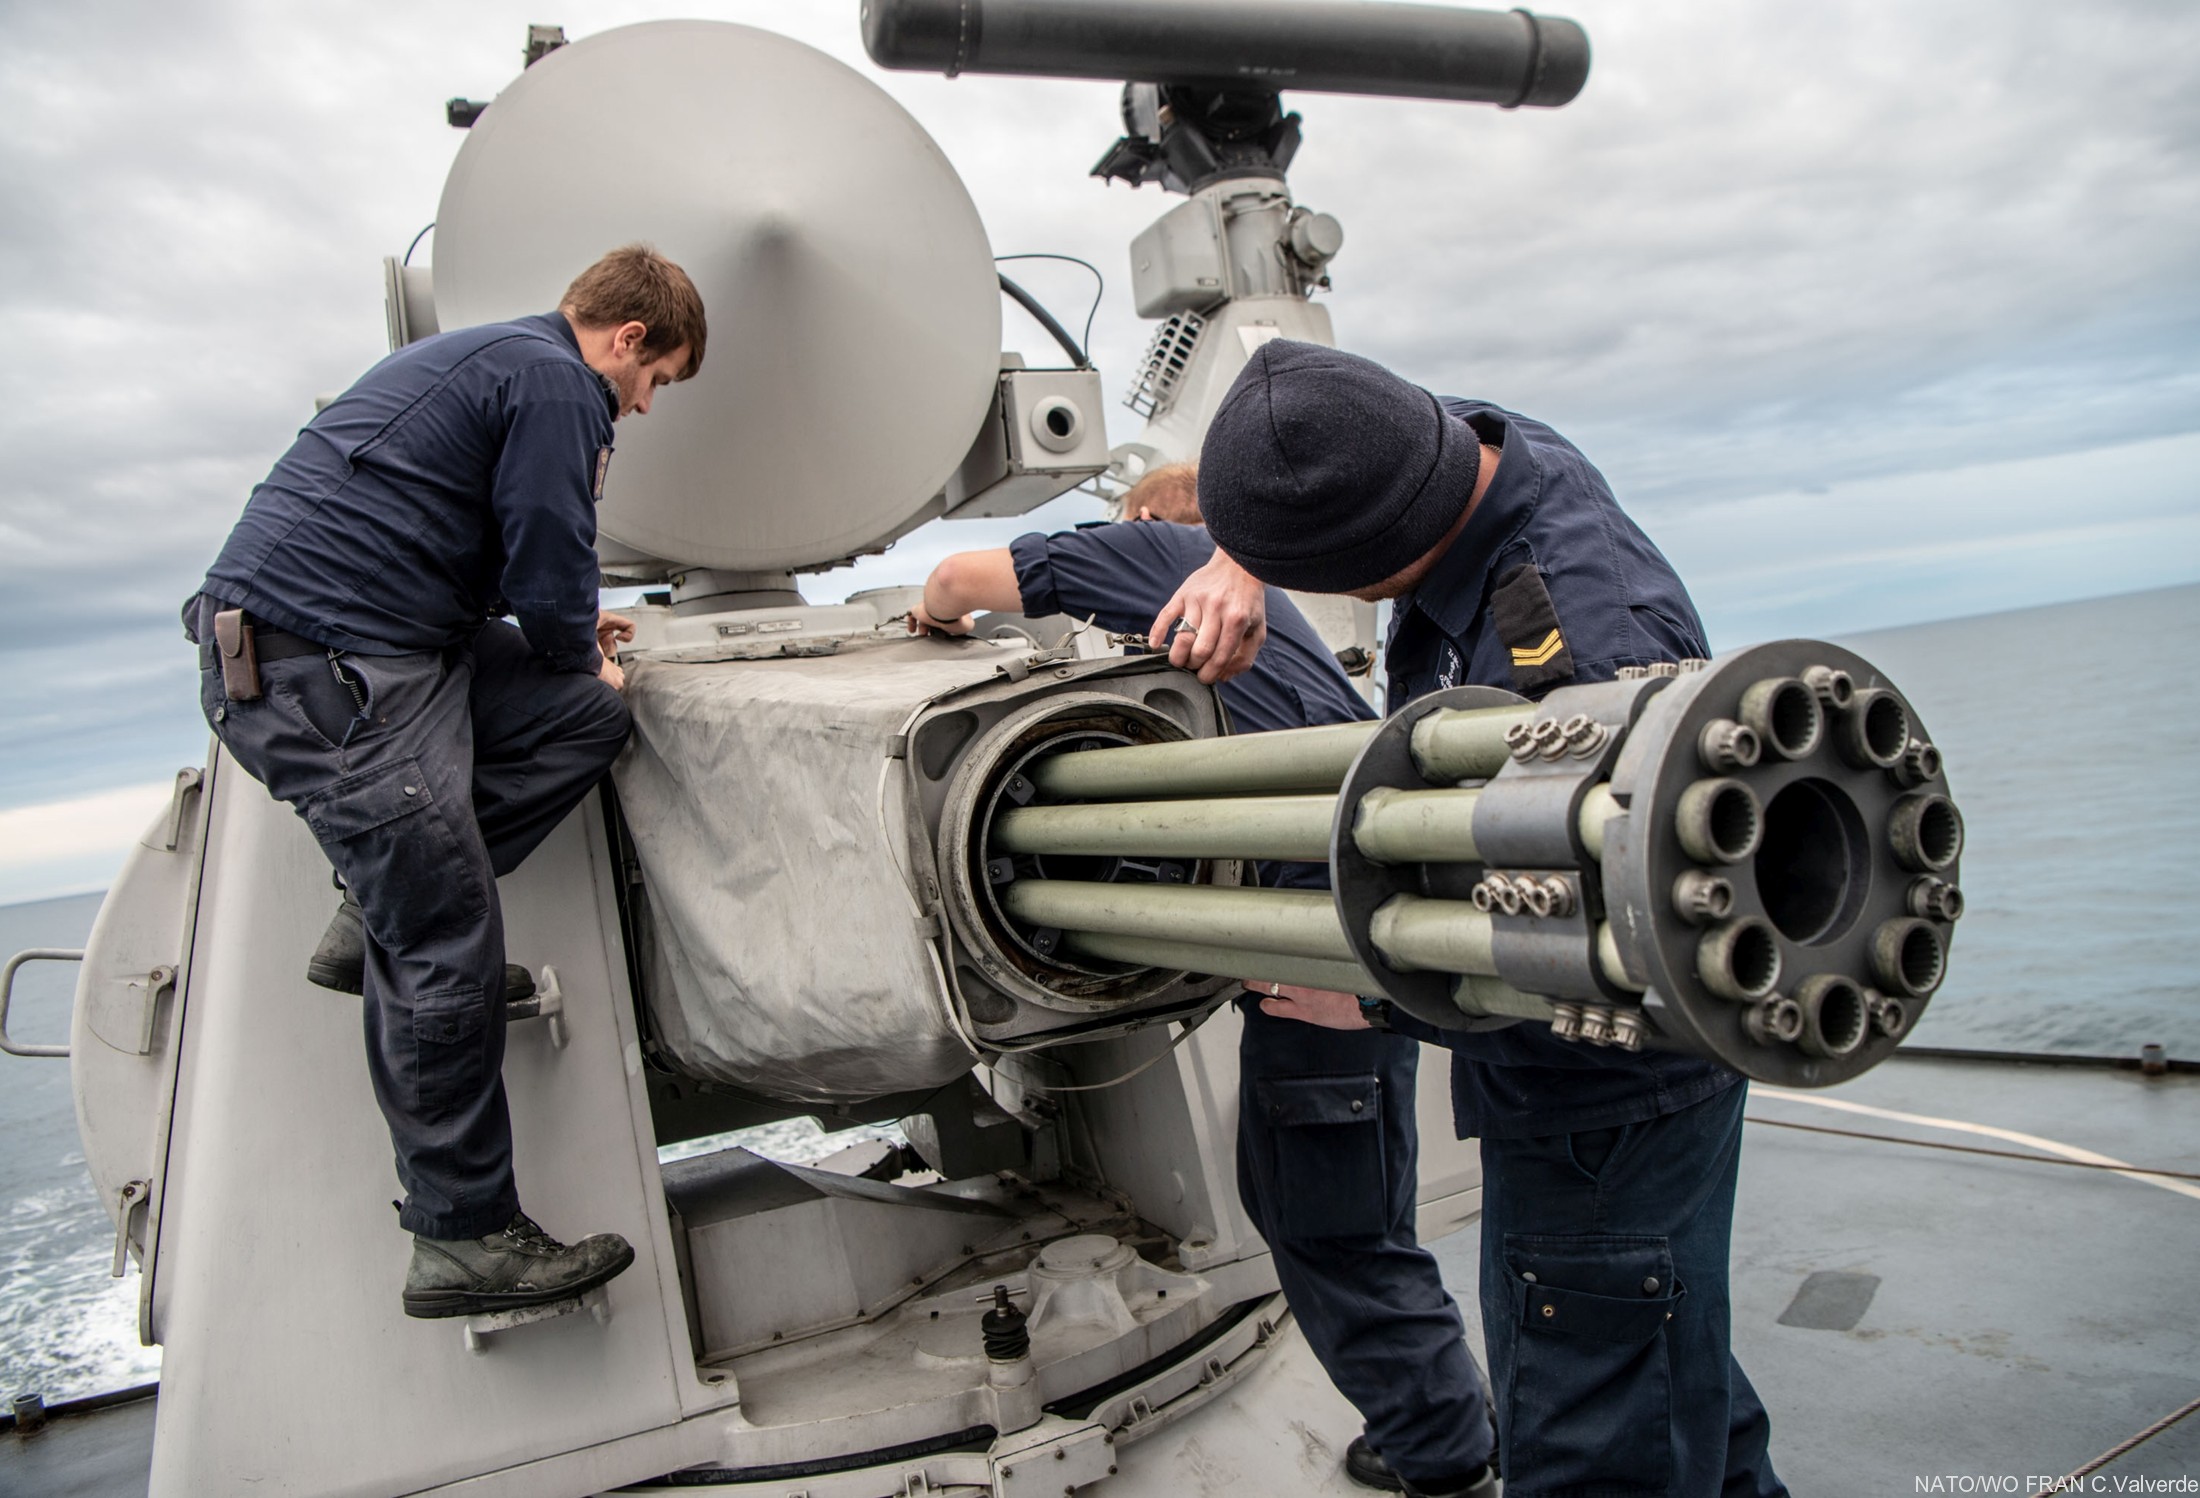 goalkeeper close-in weapon system ciws 30mm thales navy 06